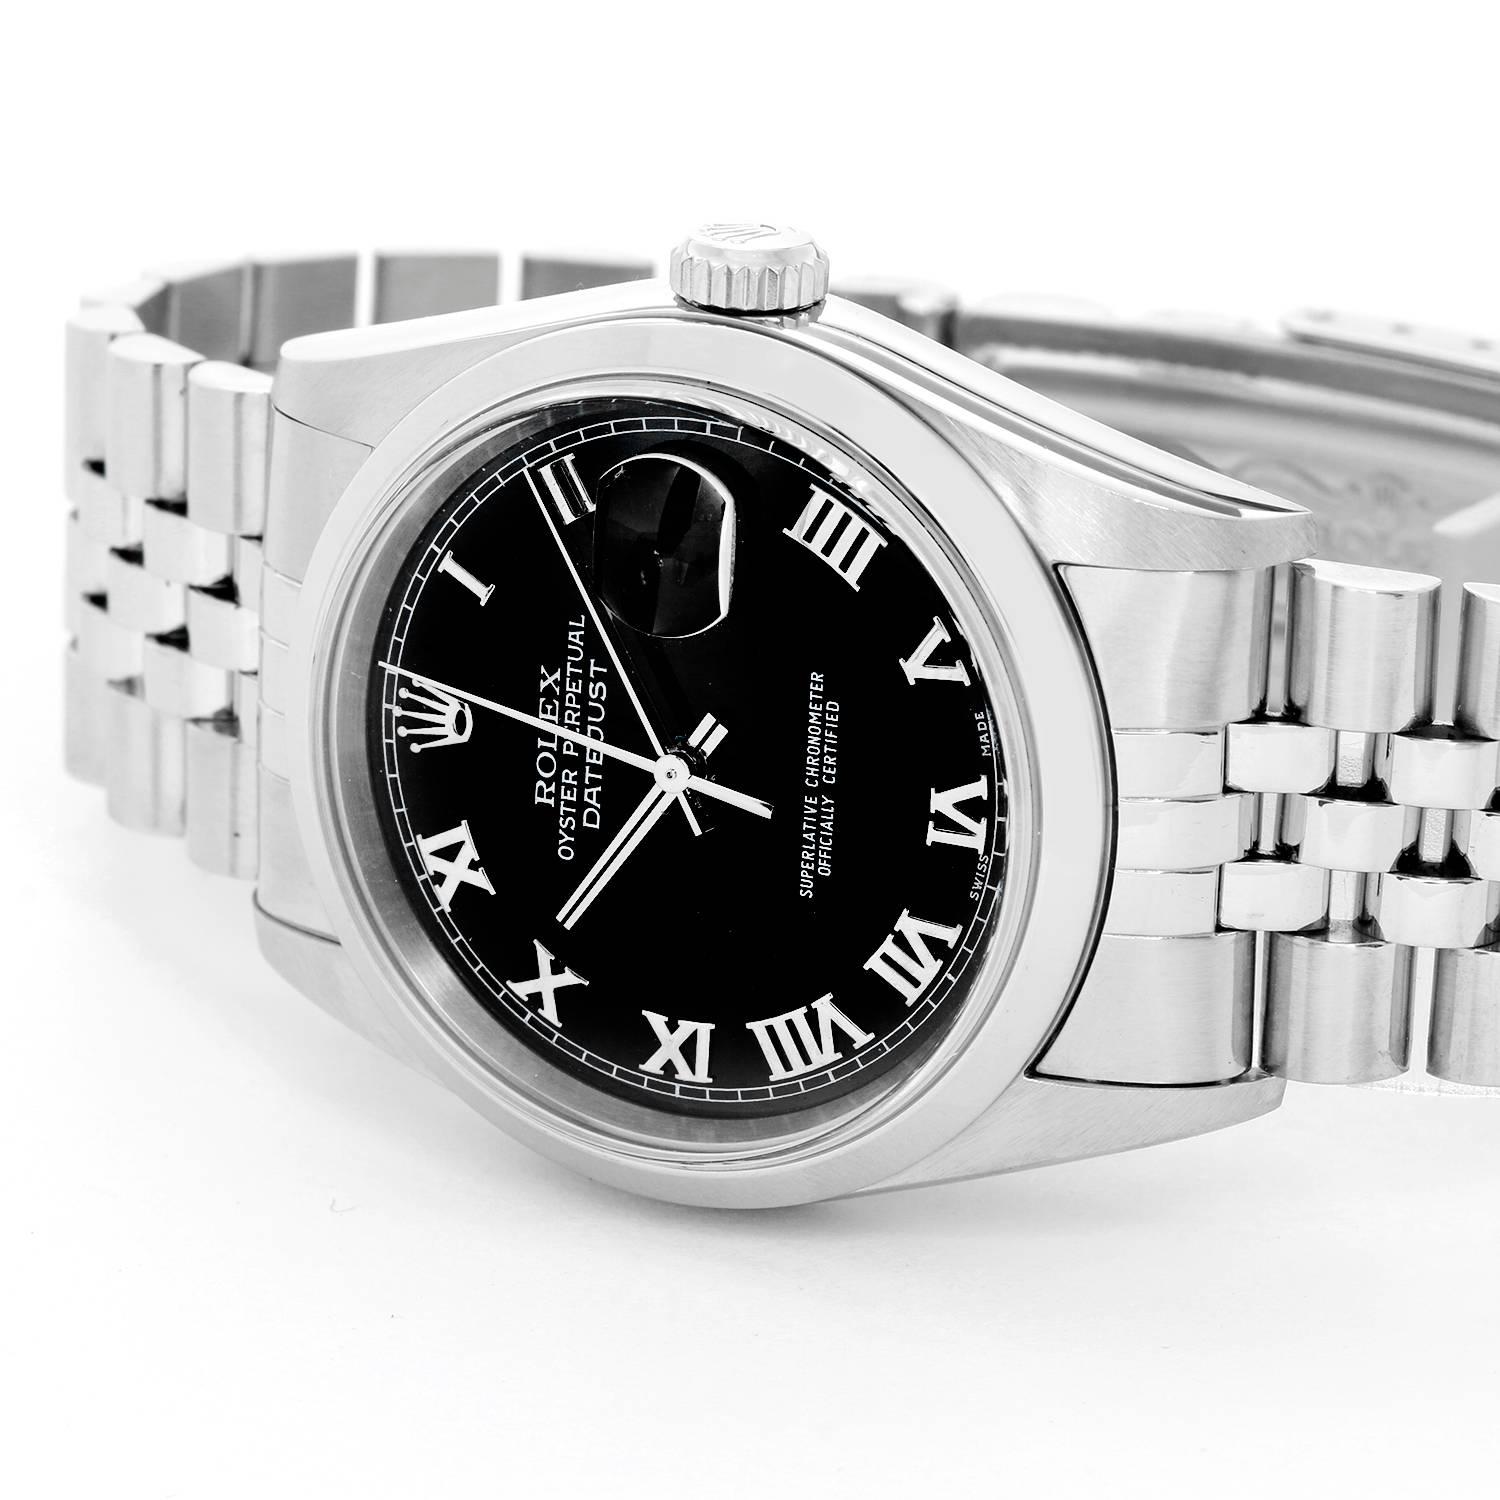 Rolex Datejust Men's Stainless Steel White Roman Numerals Watch 16200 -  Automatic winding, Quickset, sapphire crystal. Stainless steel case with smooth bezel (36mm diameter). Black dial with Roman Numerals. Stainless steel Jubilee bracelet.